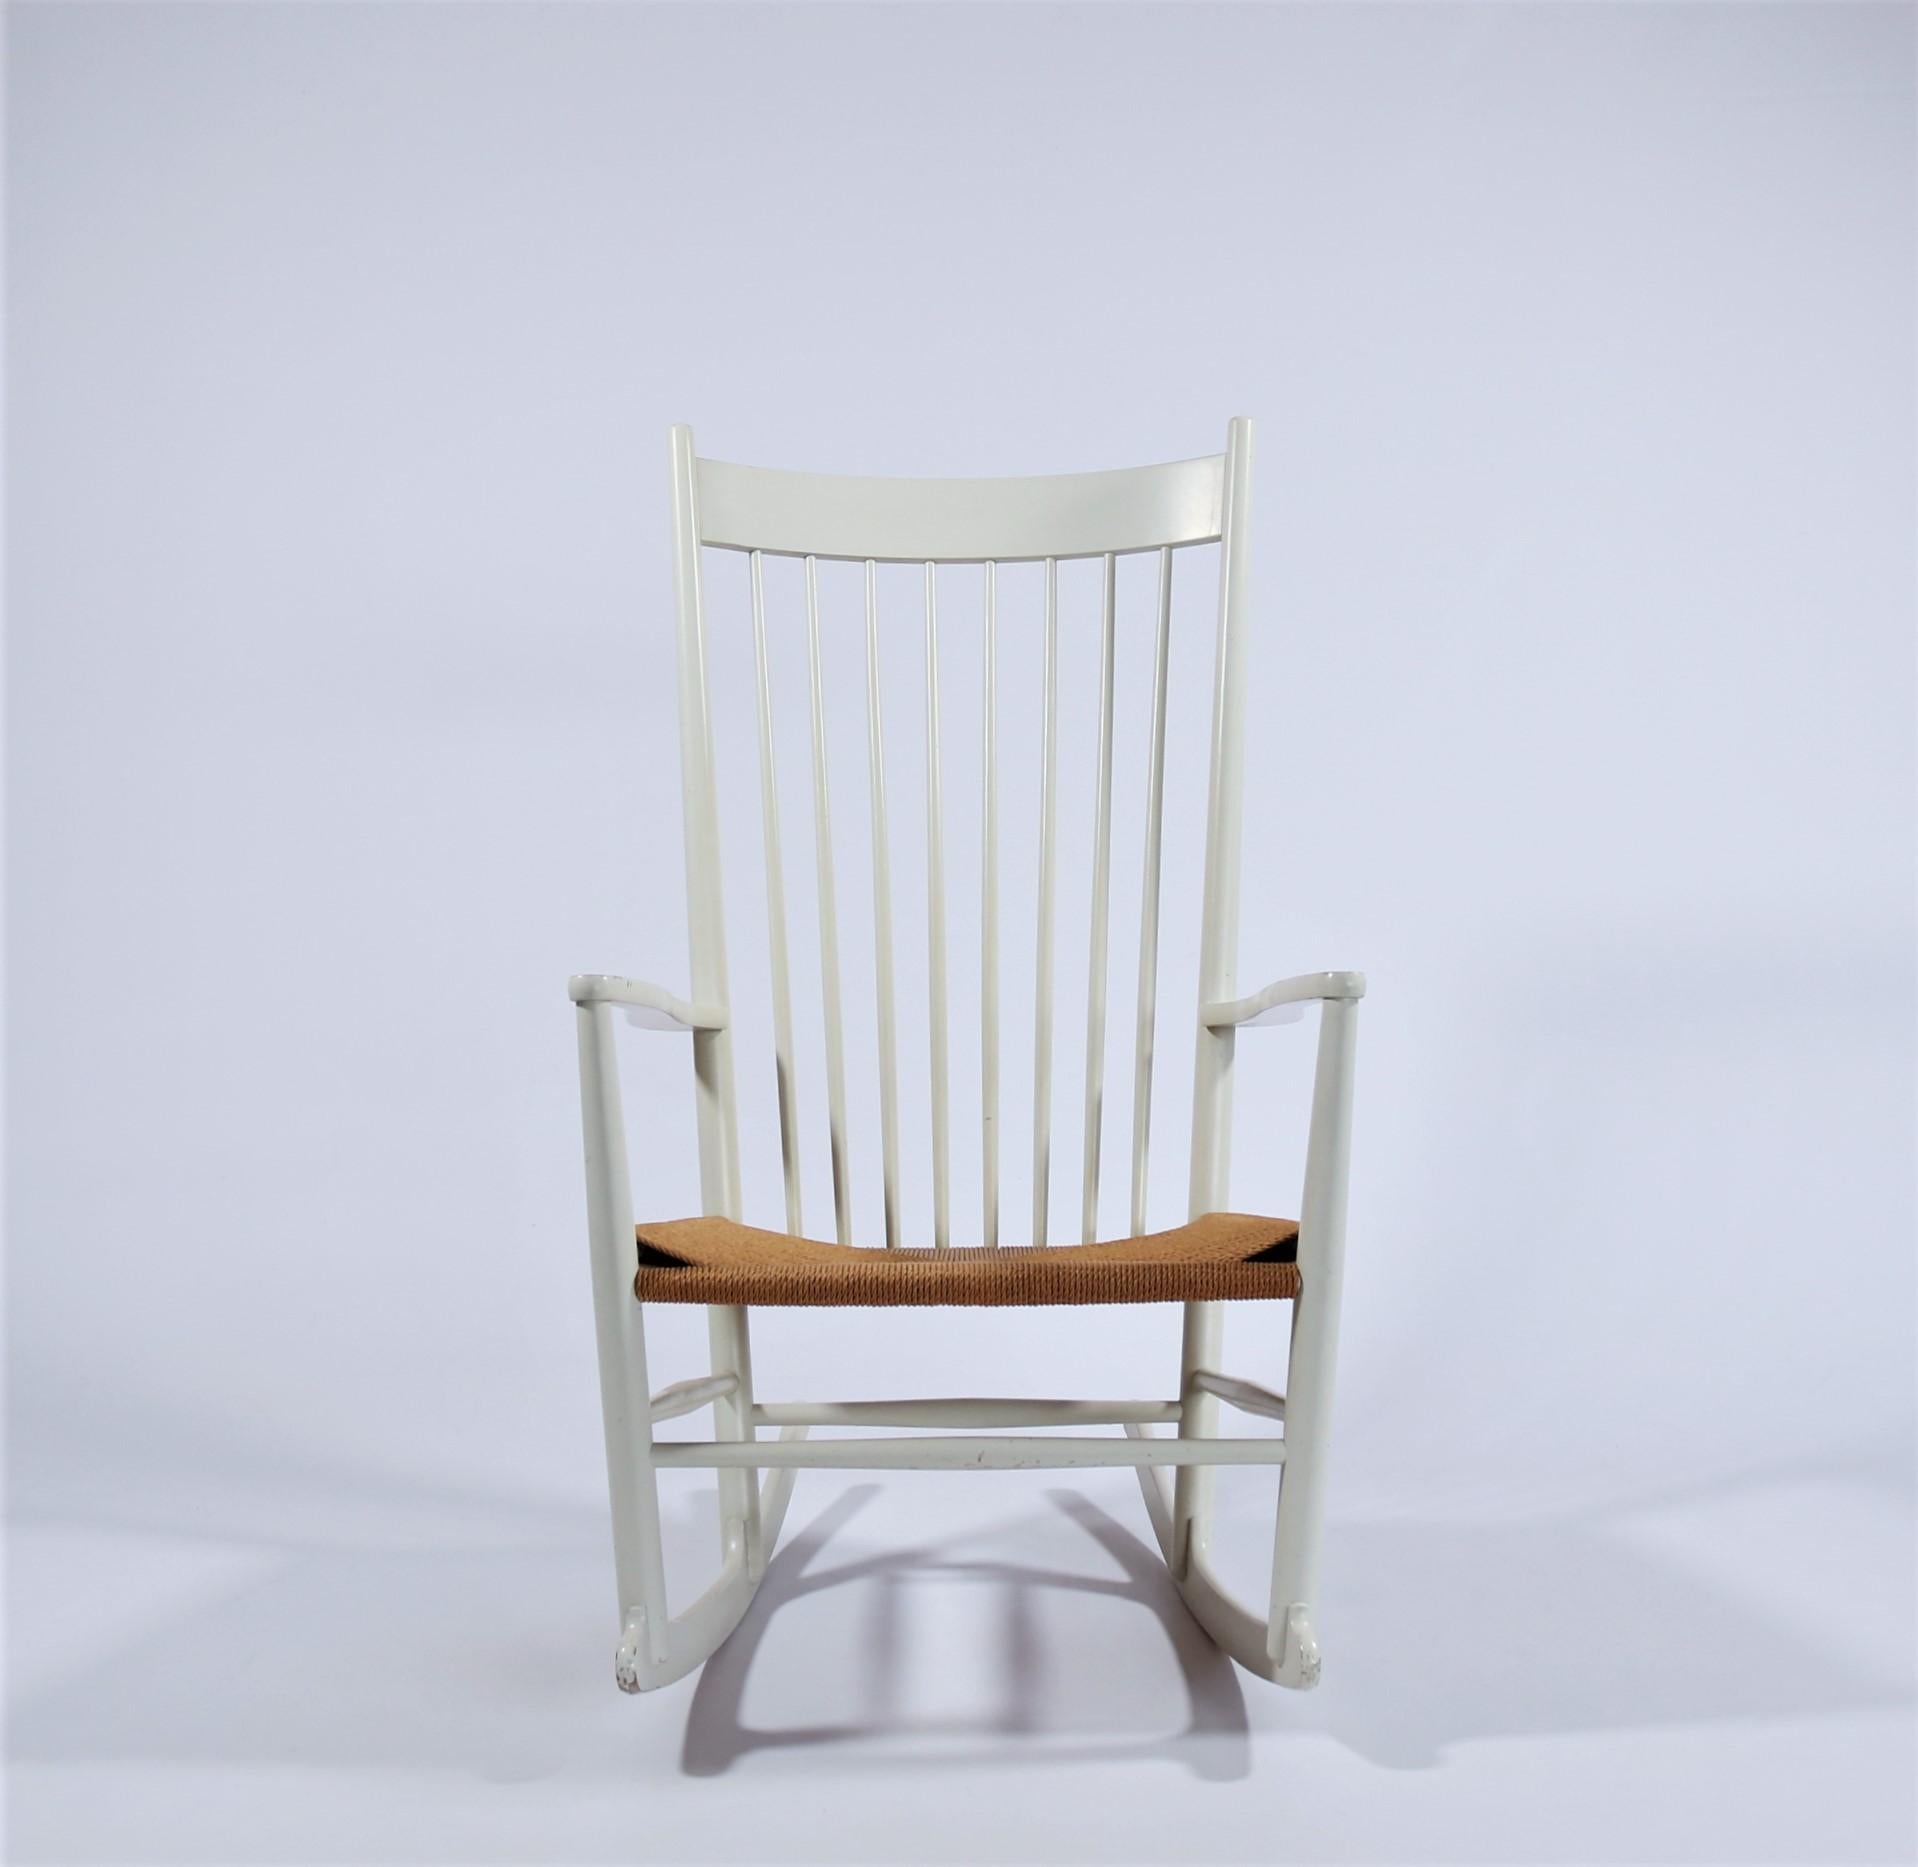 This chair is a rare and early piece of iconic Mid-Century Modern designed by Hans J. Wegner. It was designed in 1944 for FDB Mobler and has never been out of production since and is considered to be one of the most recognizable icons of Danish